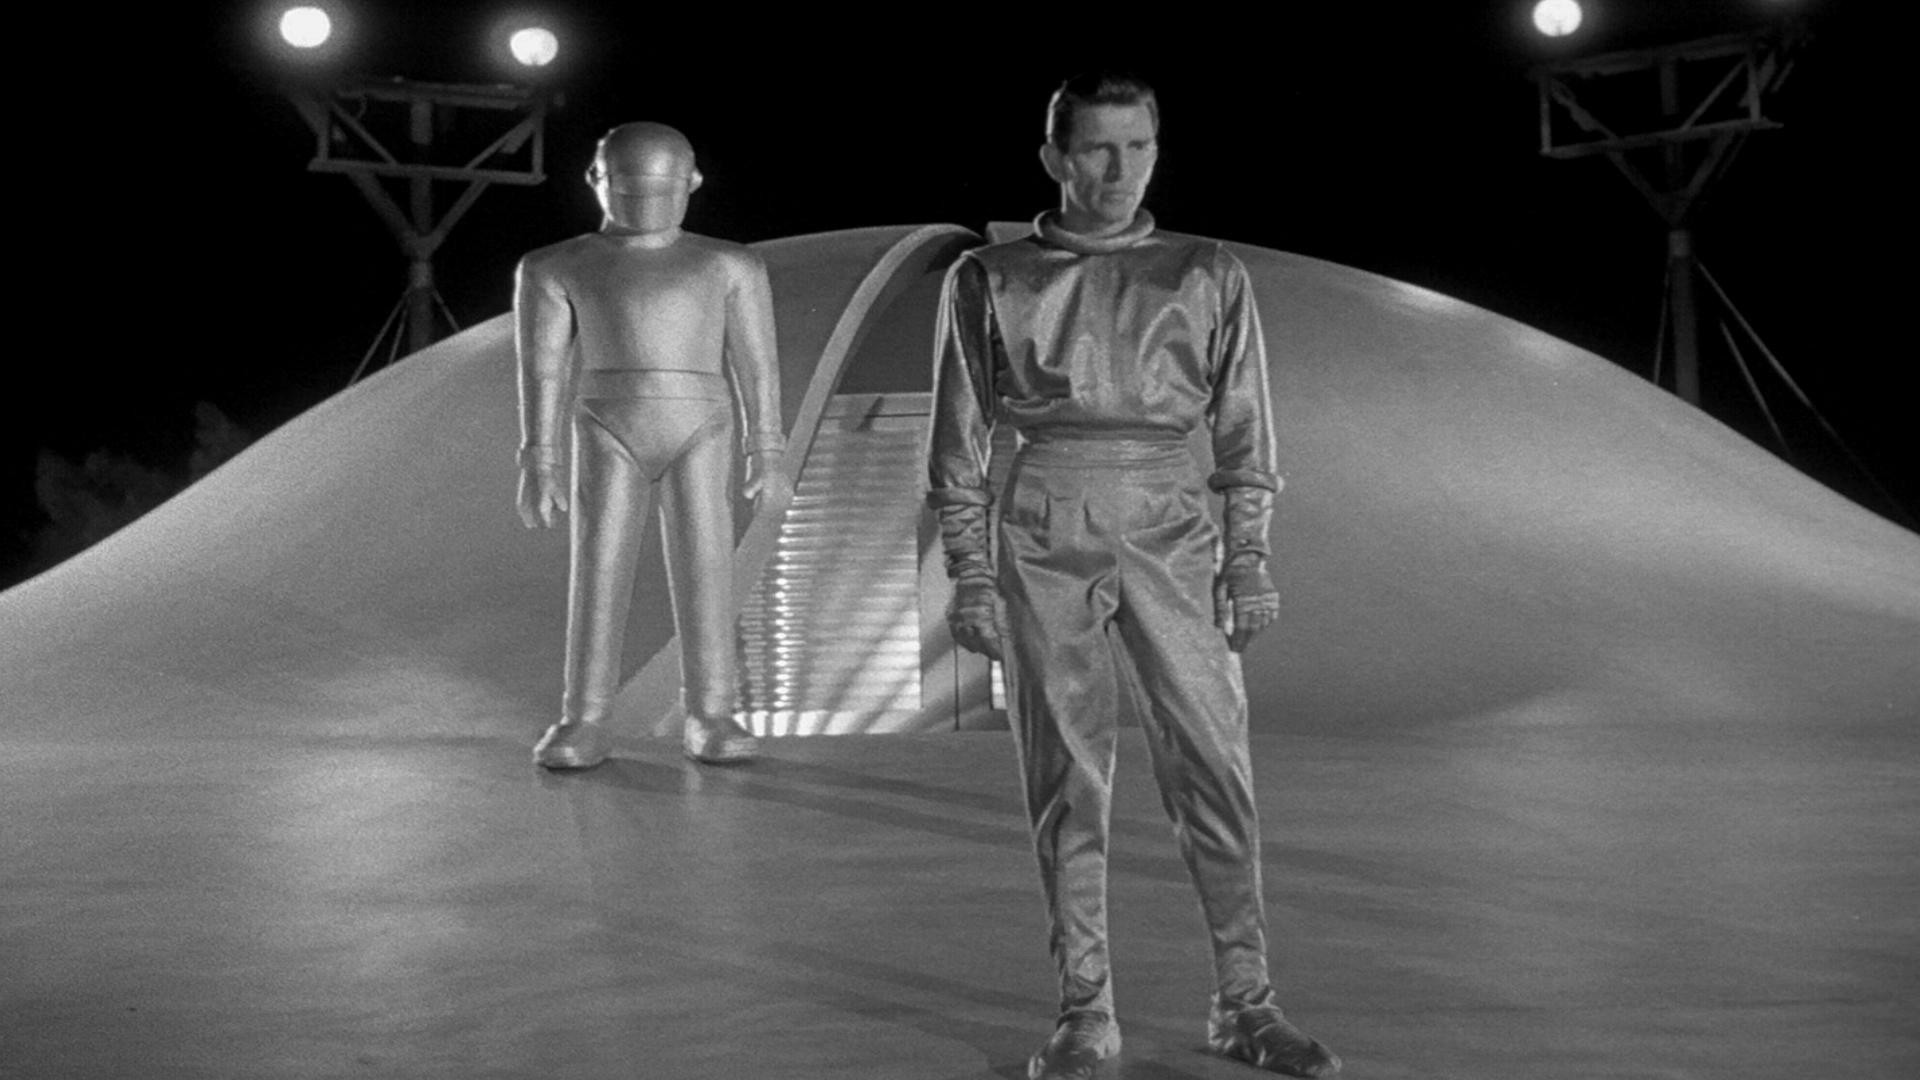 The Day The Earth Stood Still (1951) Pics, Movie Collection